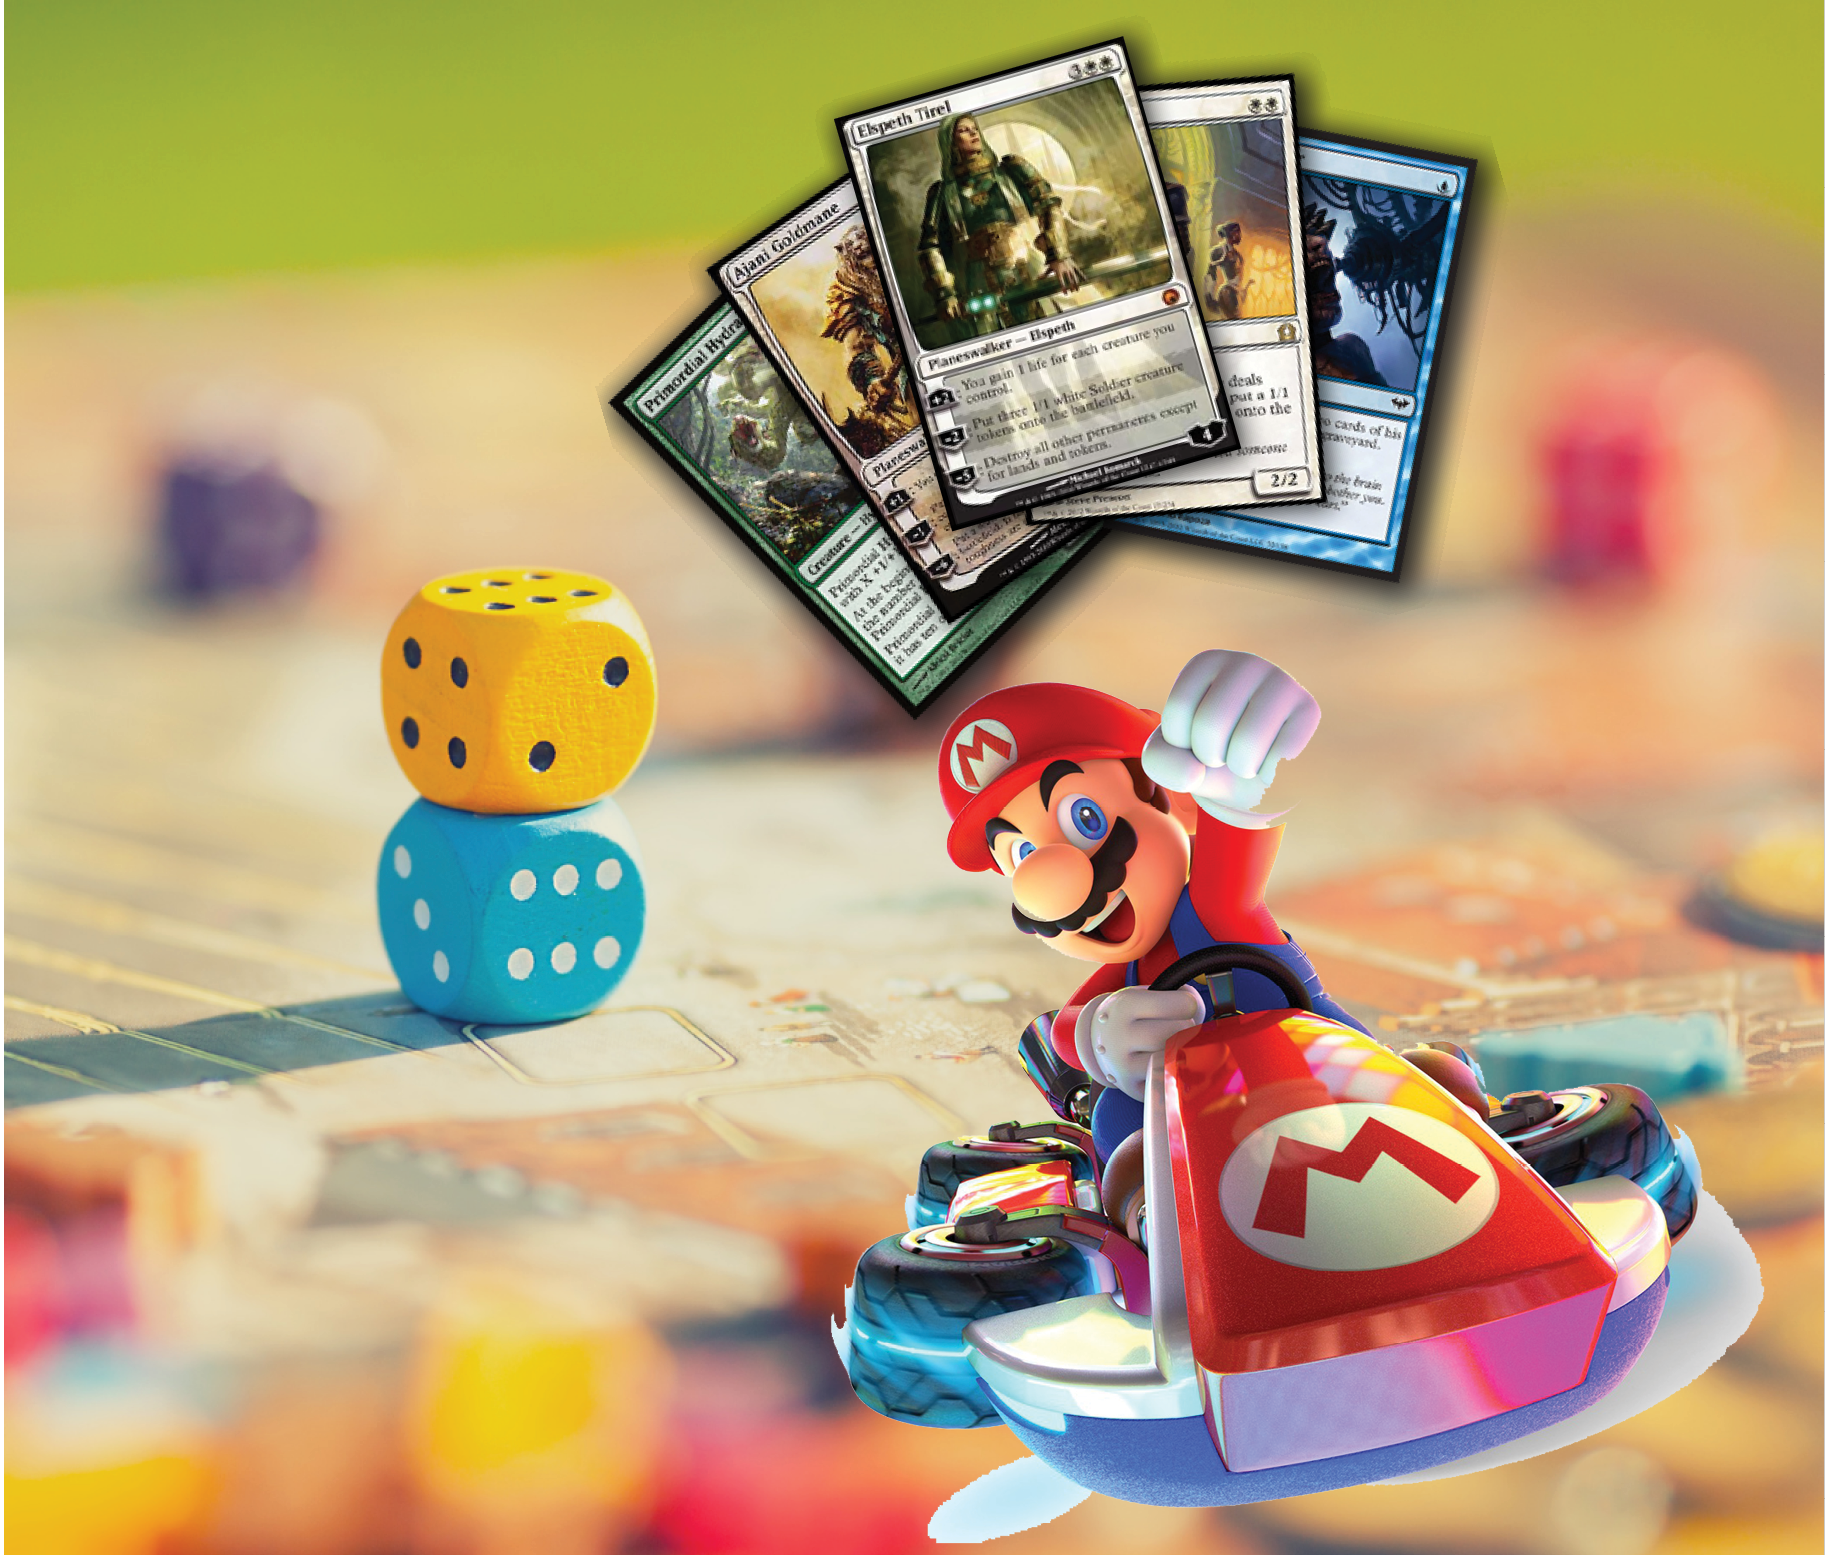 Dice, trading cards, and MarioKart icons